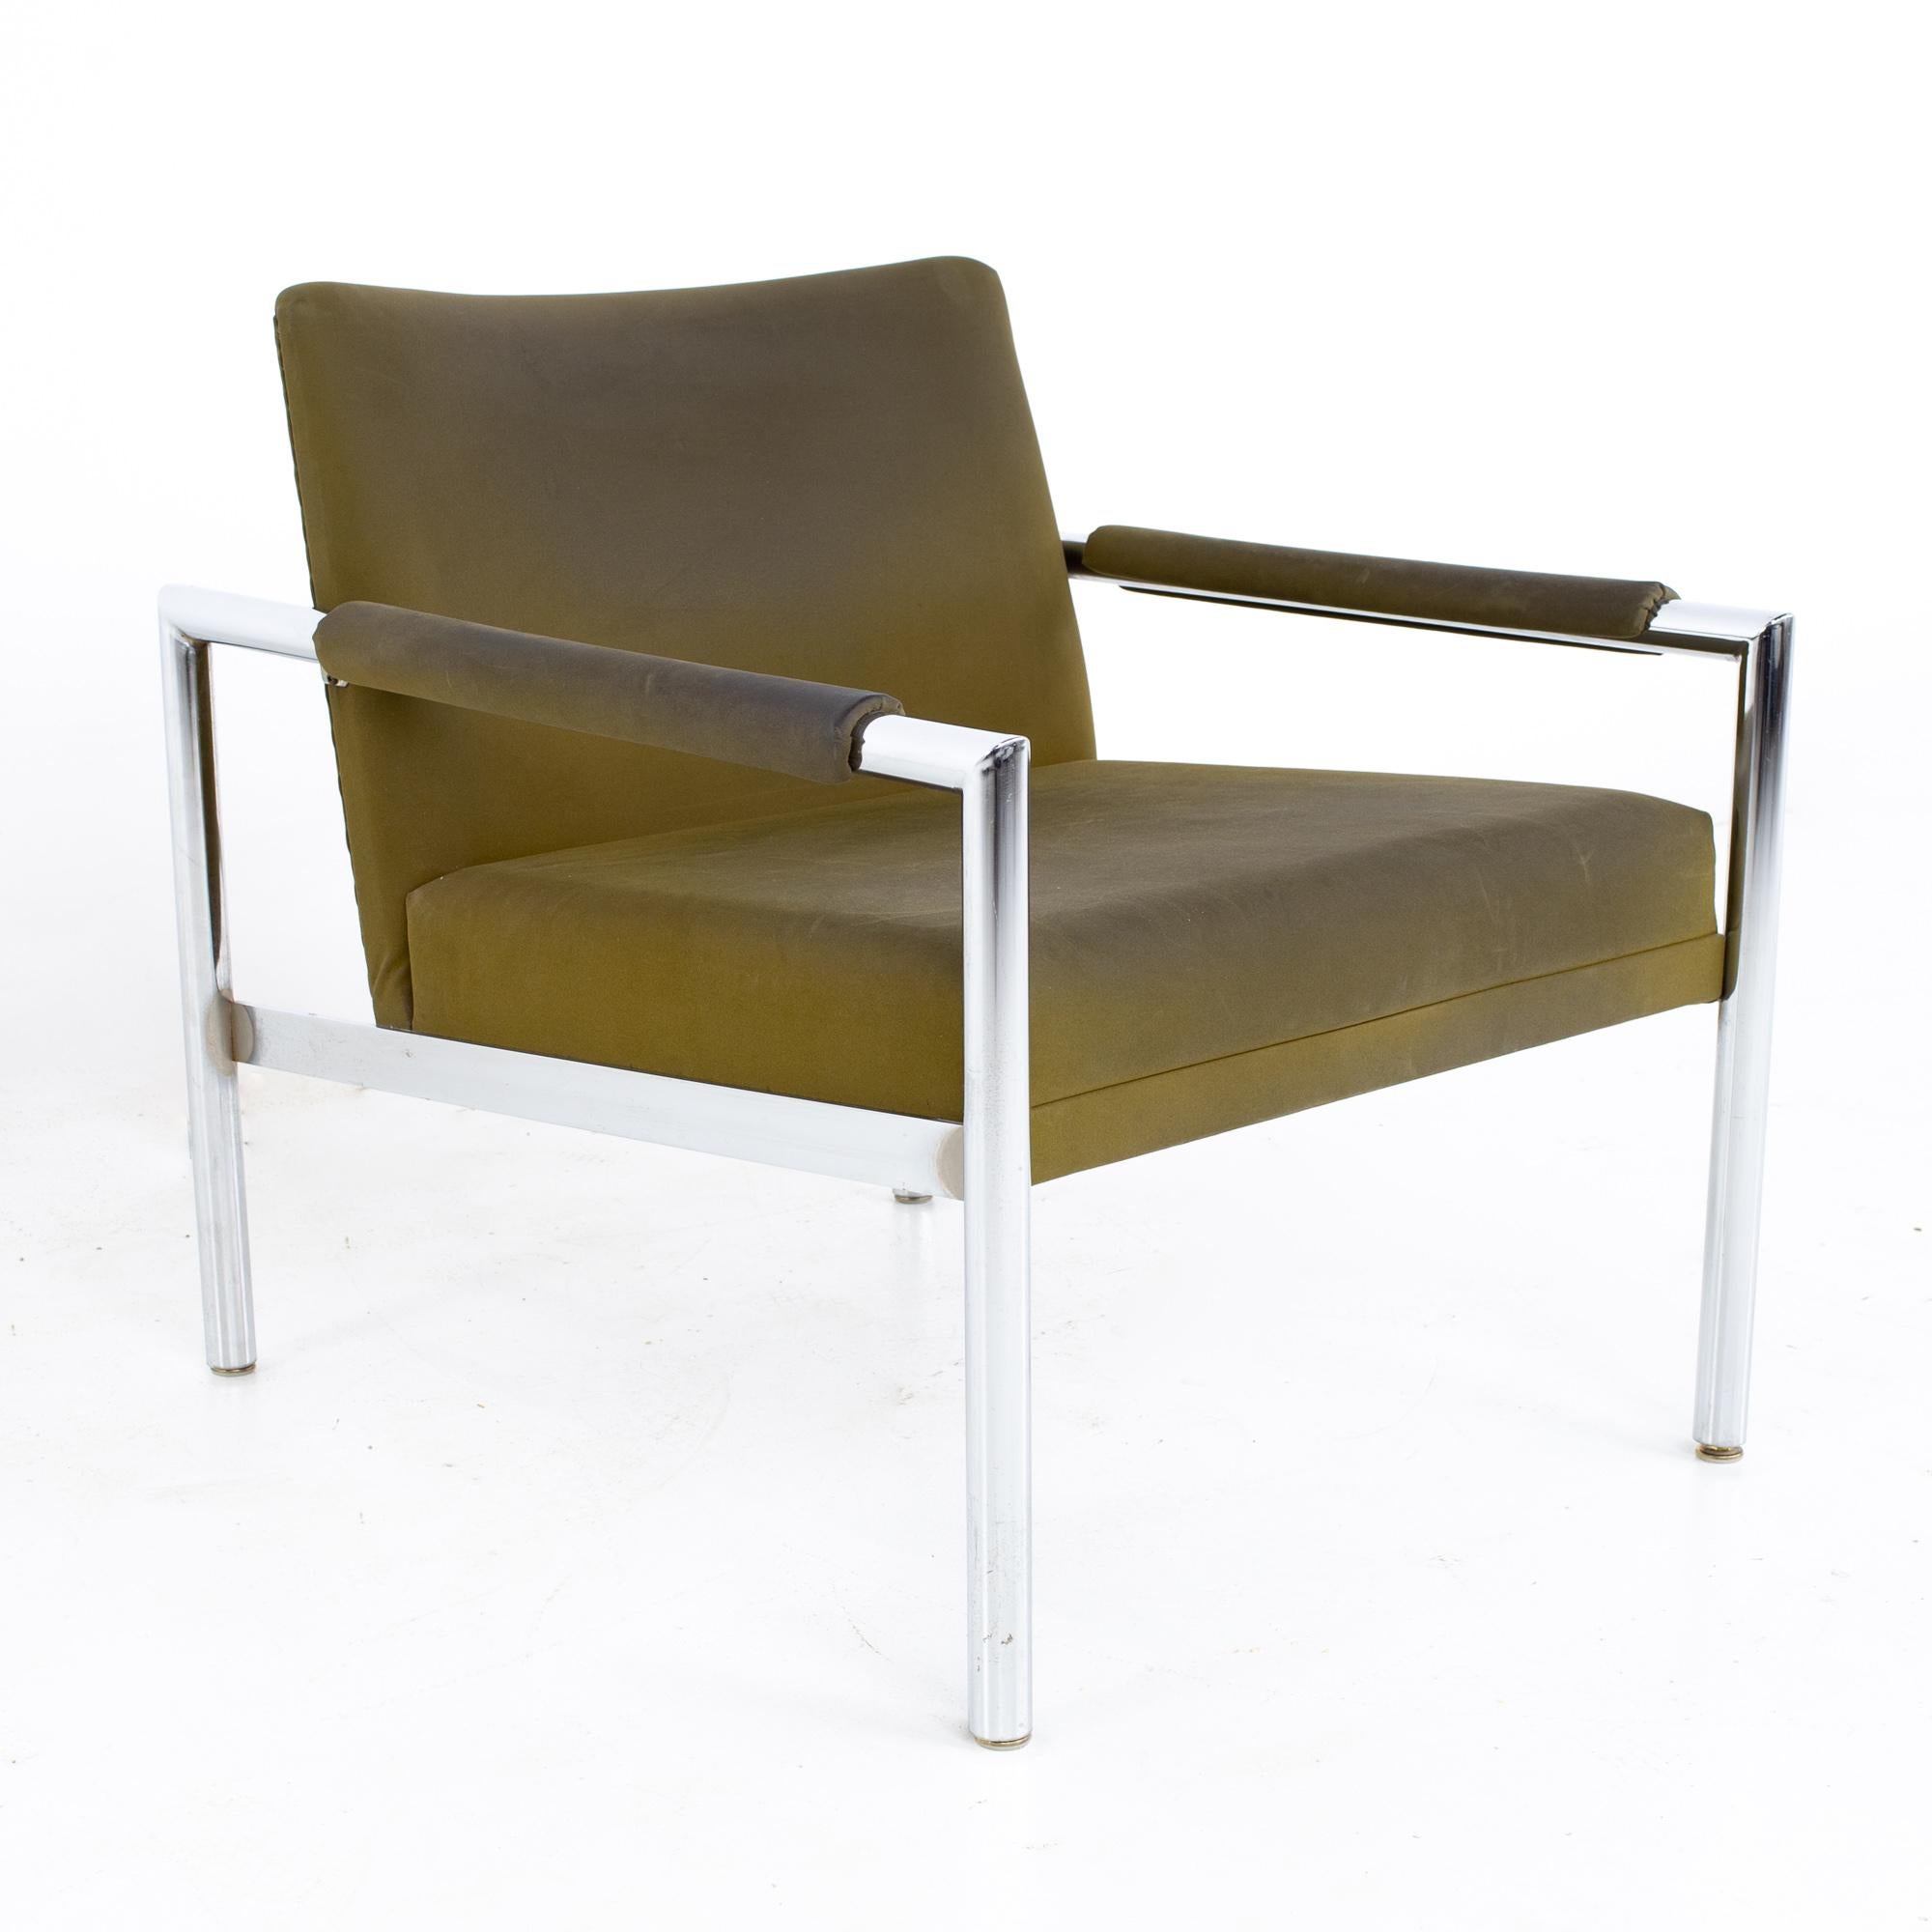 Mid-Century Modern Jack Cartwright for Founders Style Mid Century Chrome Lounge Chairs, a Pair